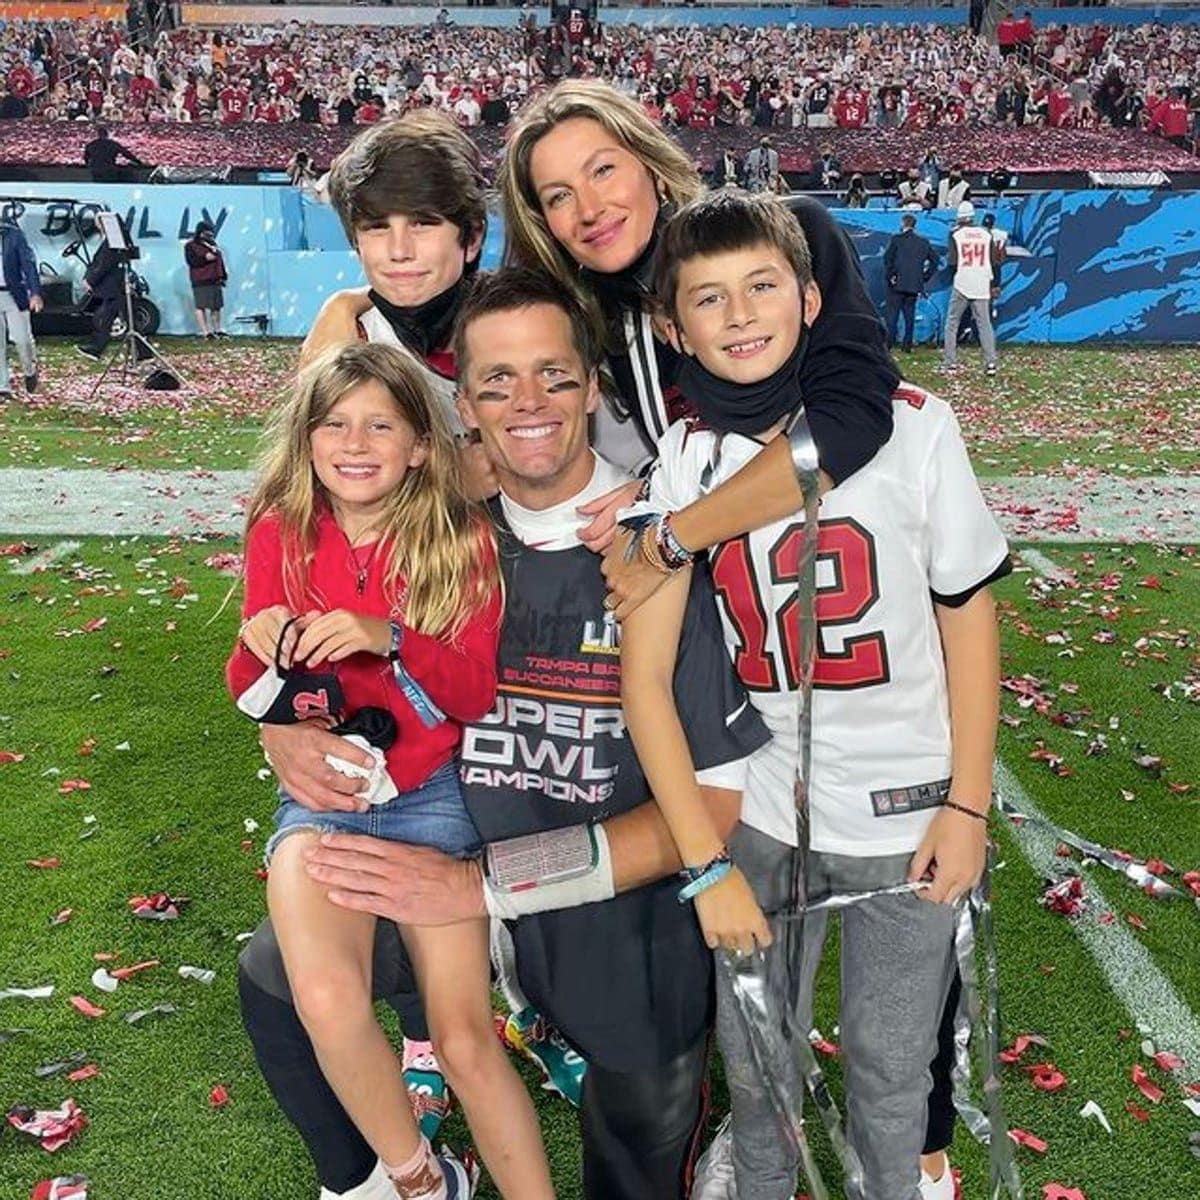 Gisele Bündchen shares new photos of Tom Brady and his 3 kids from the Super Bowl